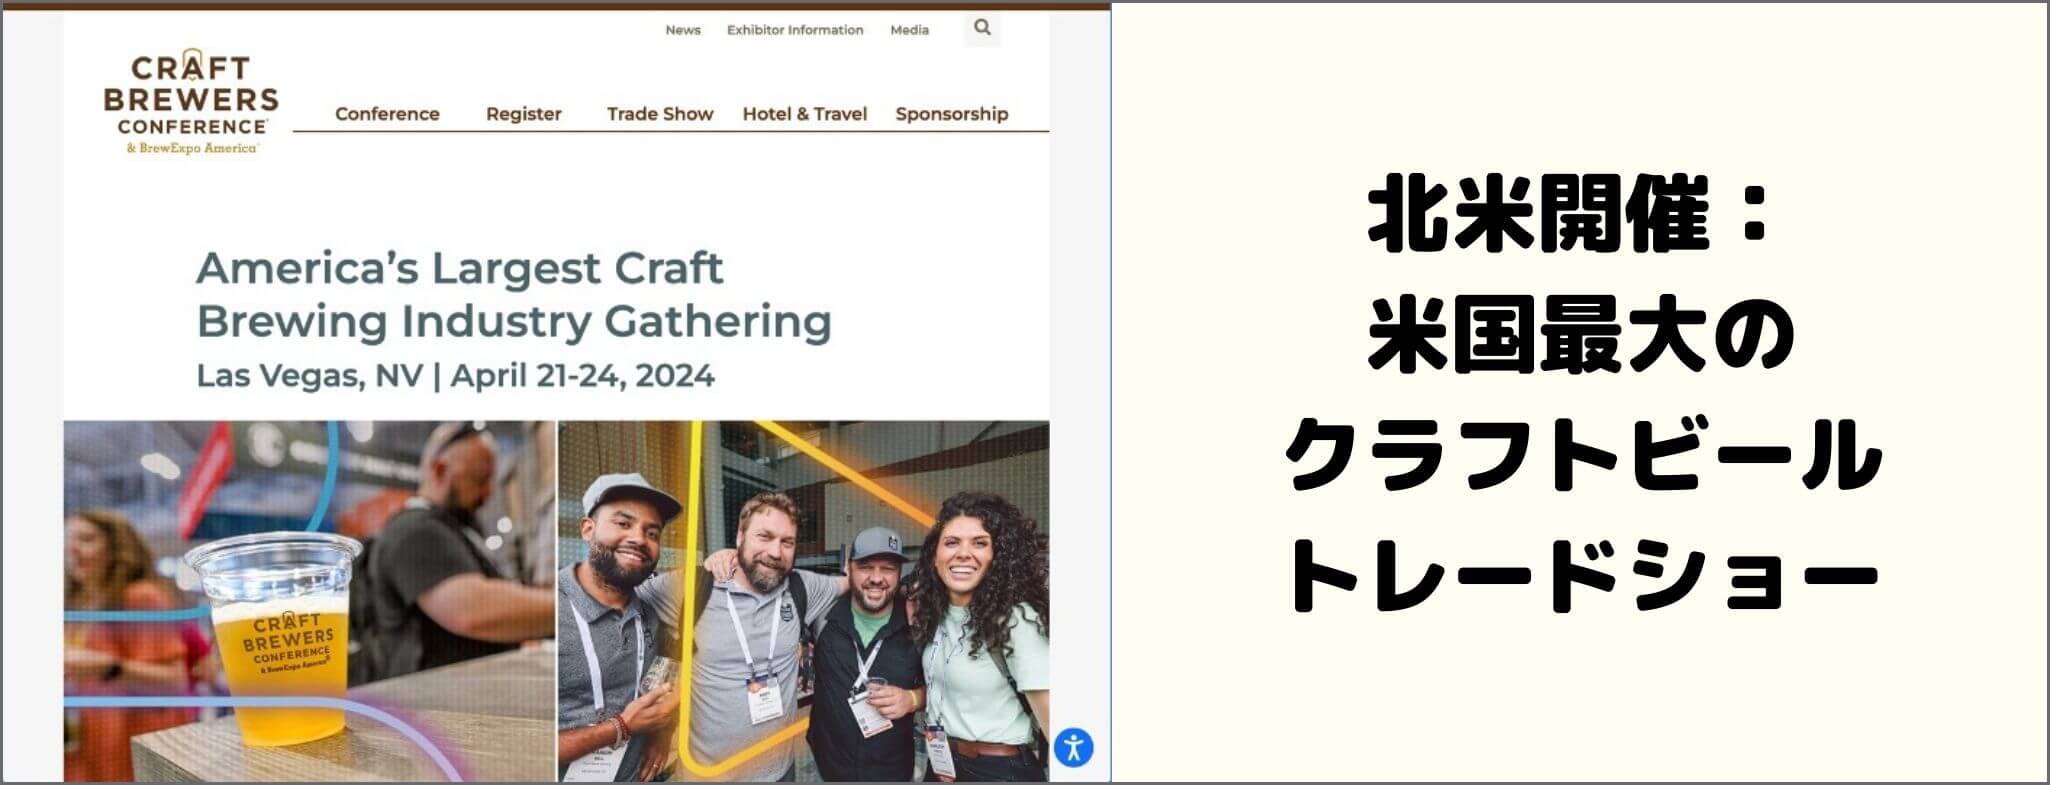 Craft Brewers Conference 2024 イベントグローブ